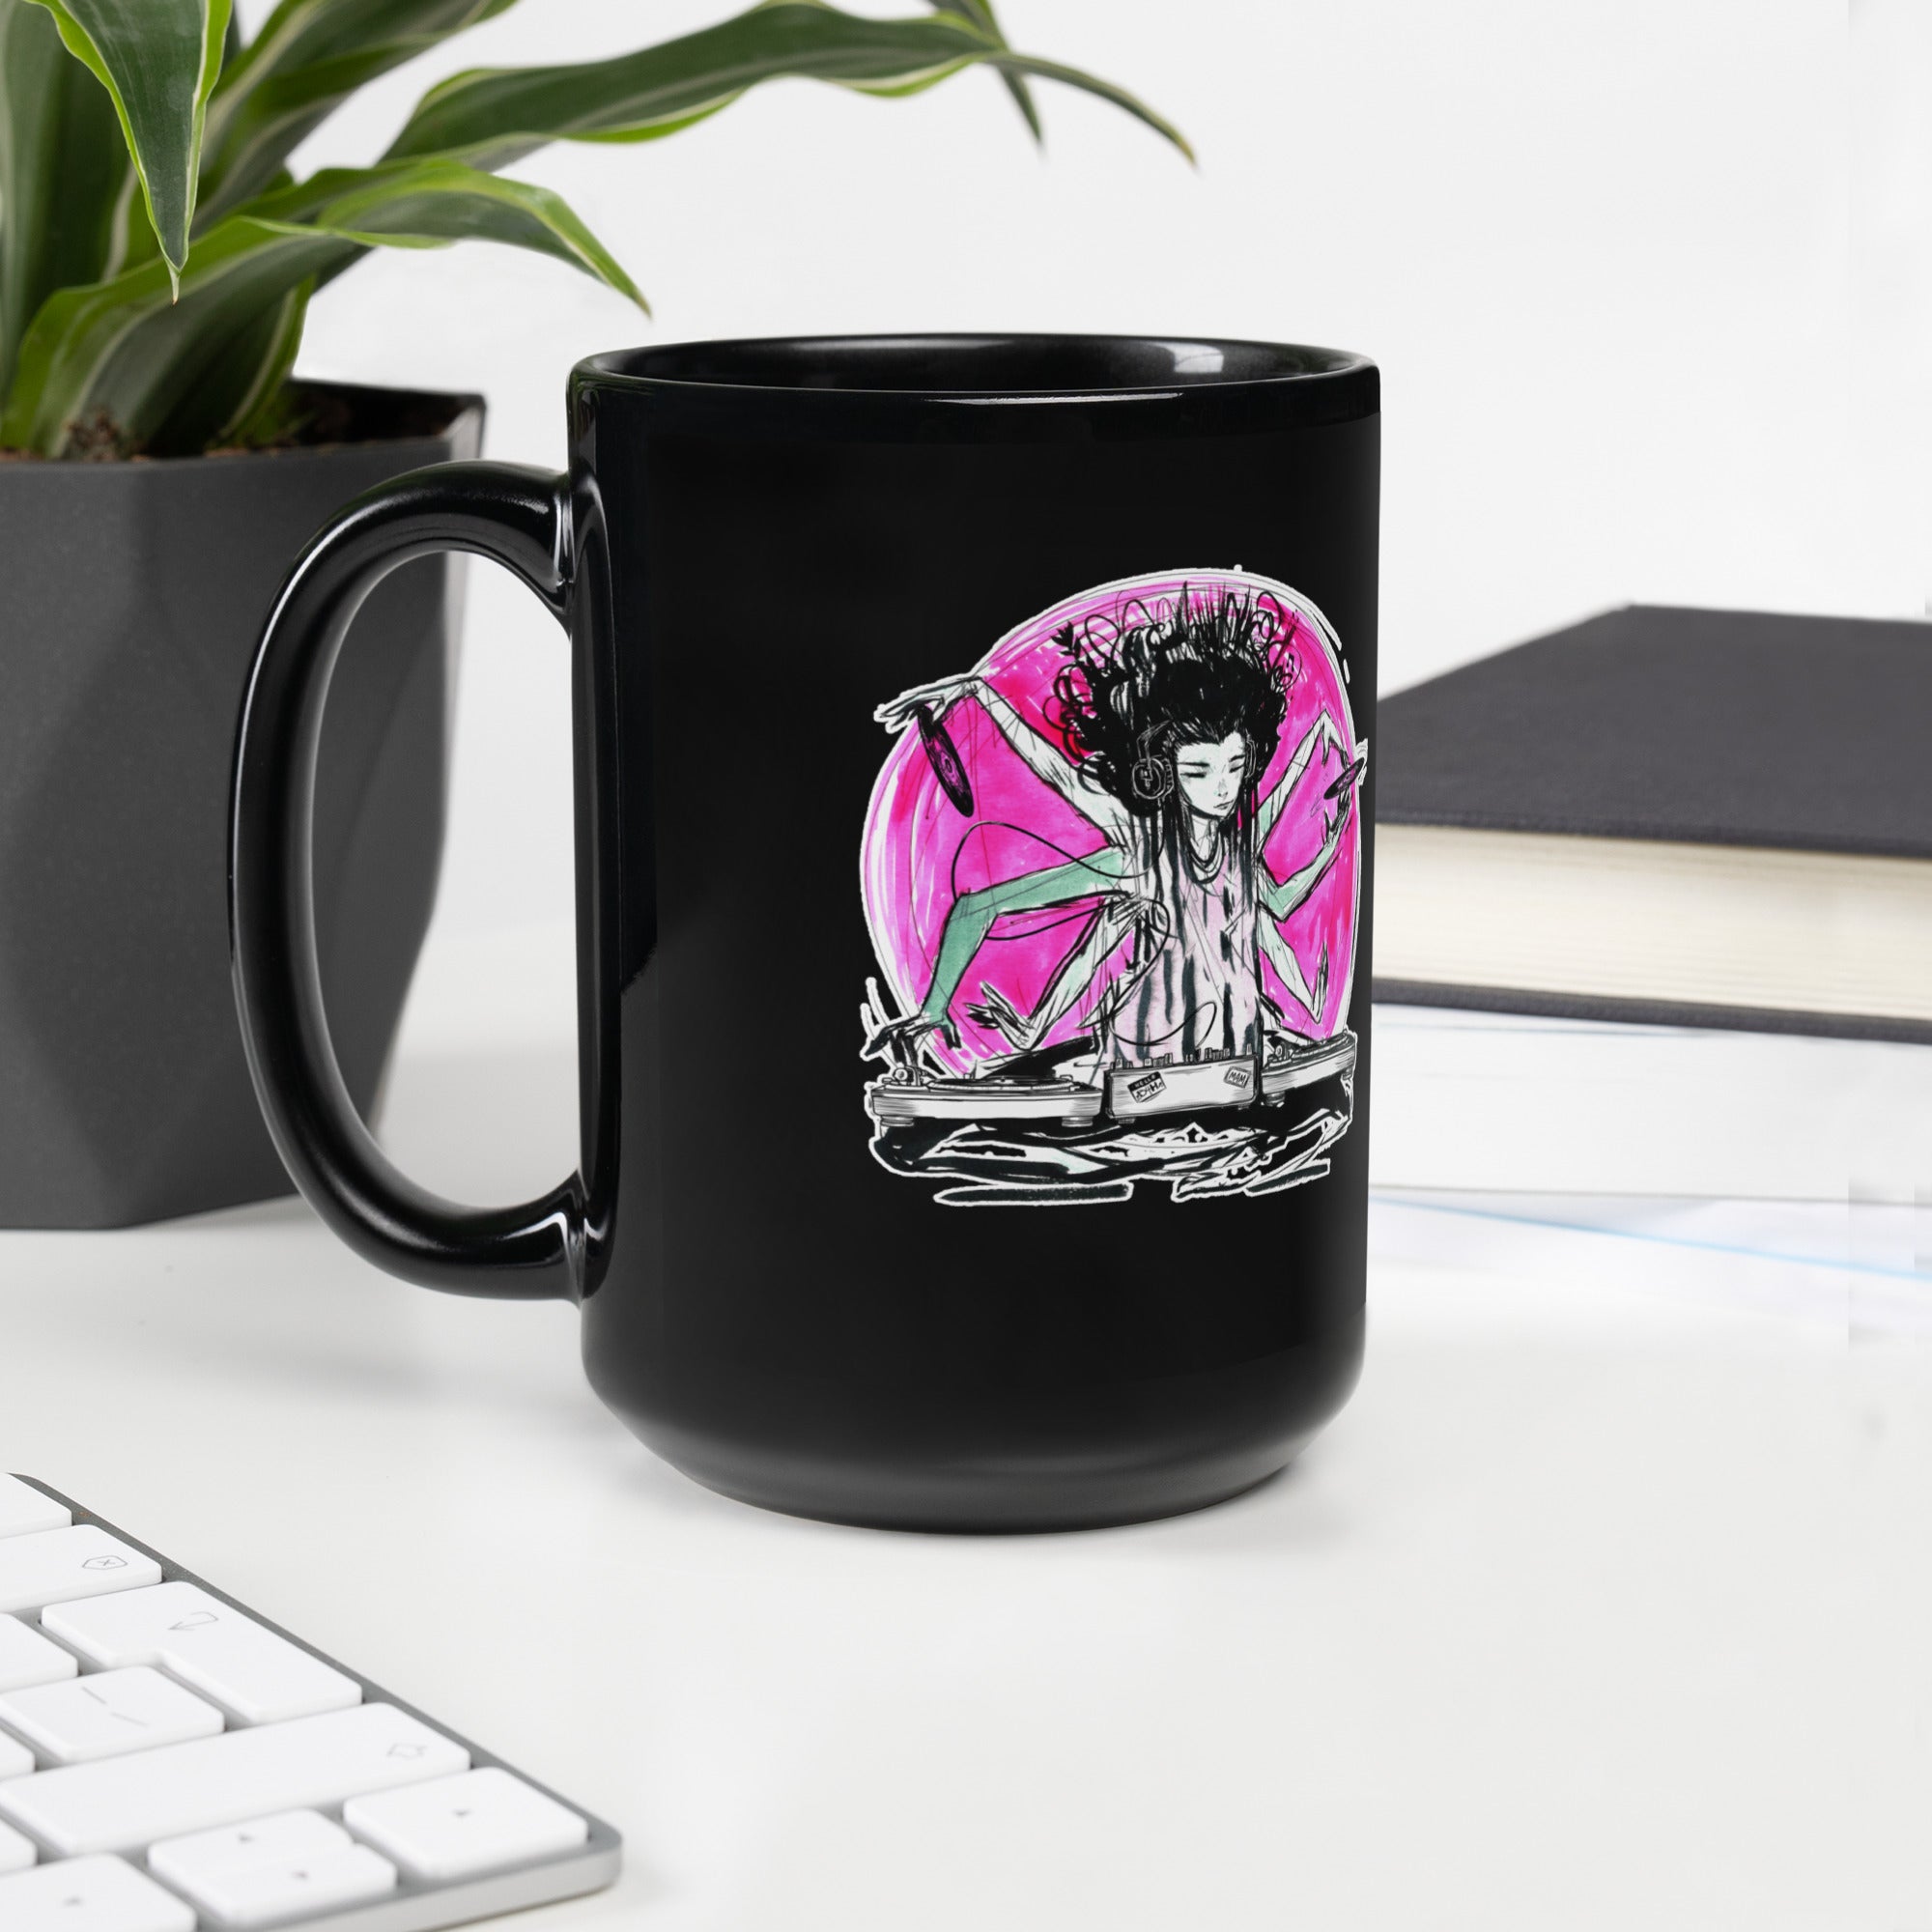 EVERY WOMAN IN THE MIX - Black Glossy Mug